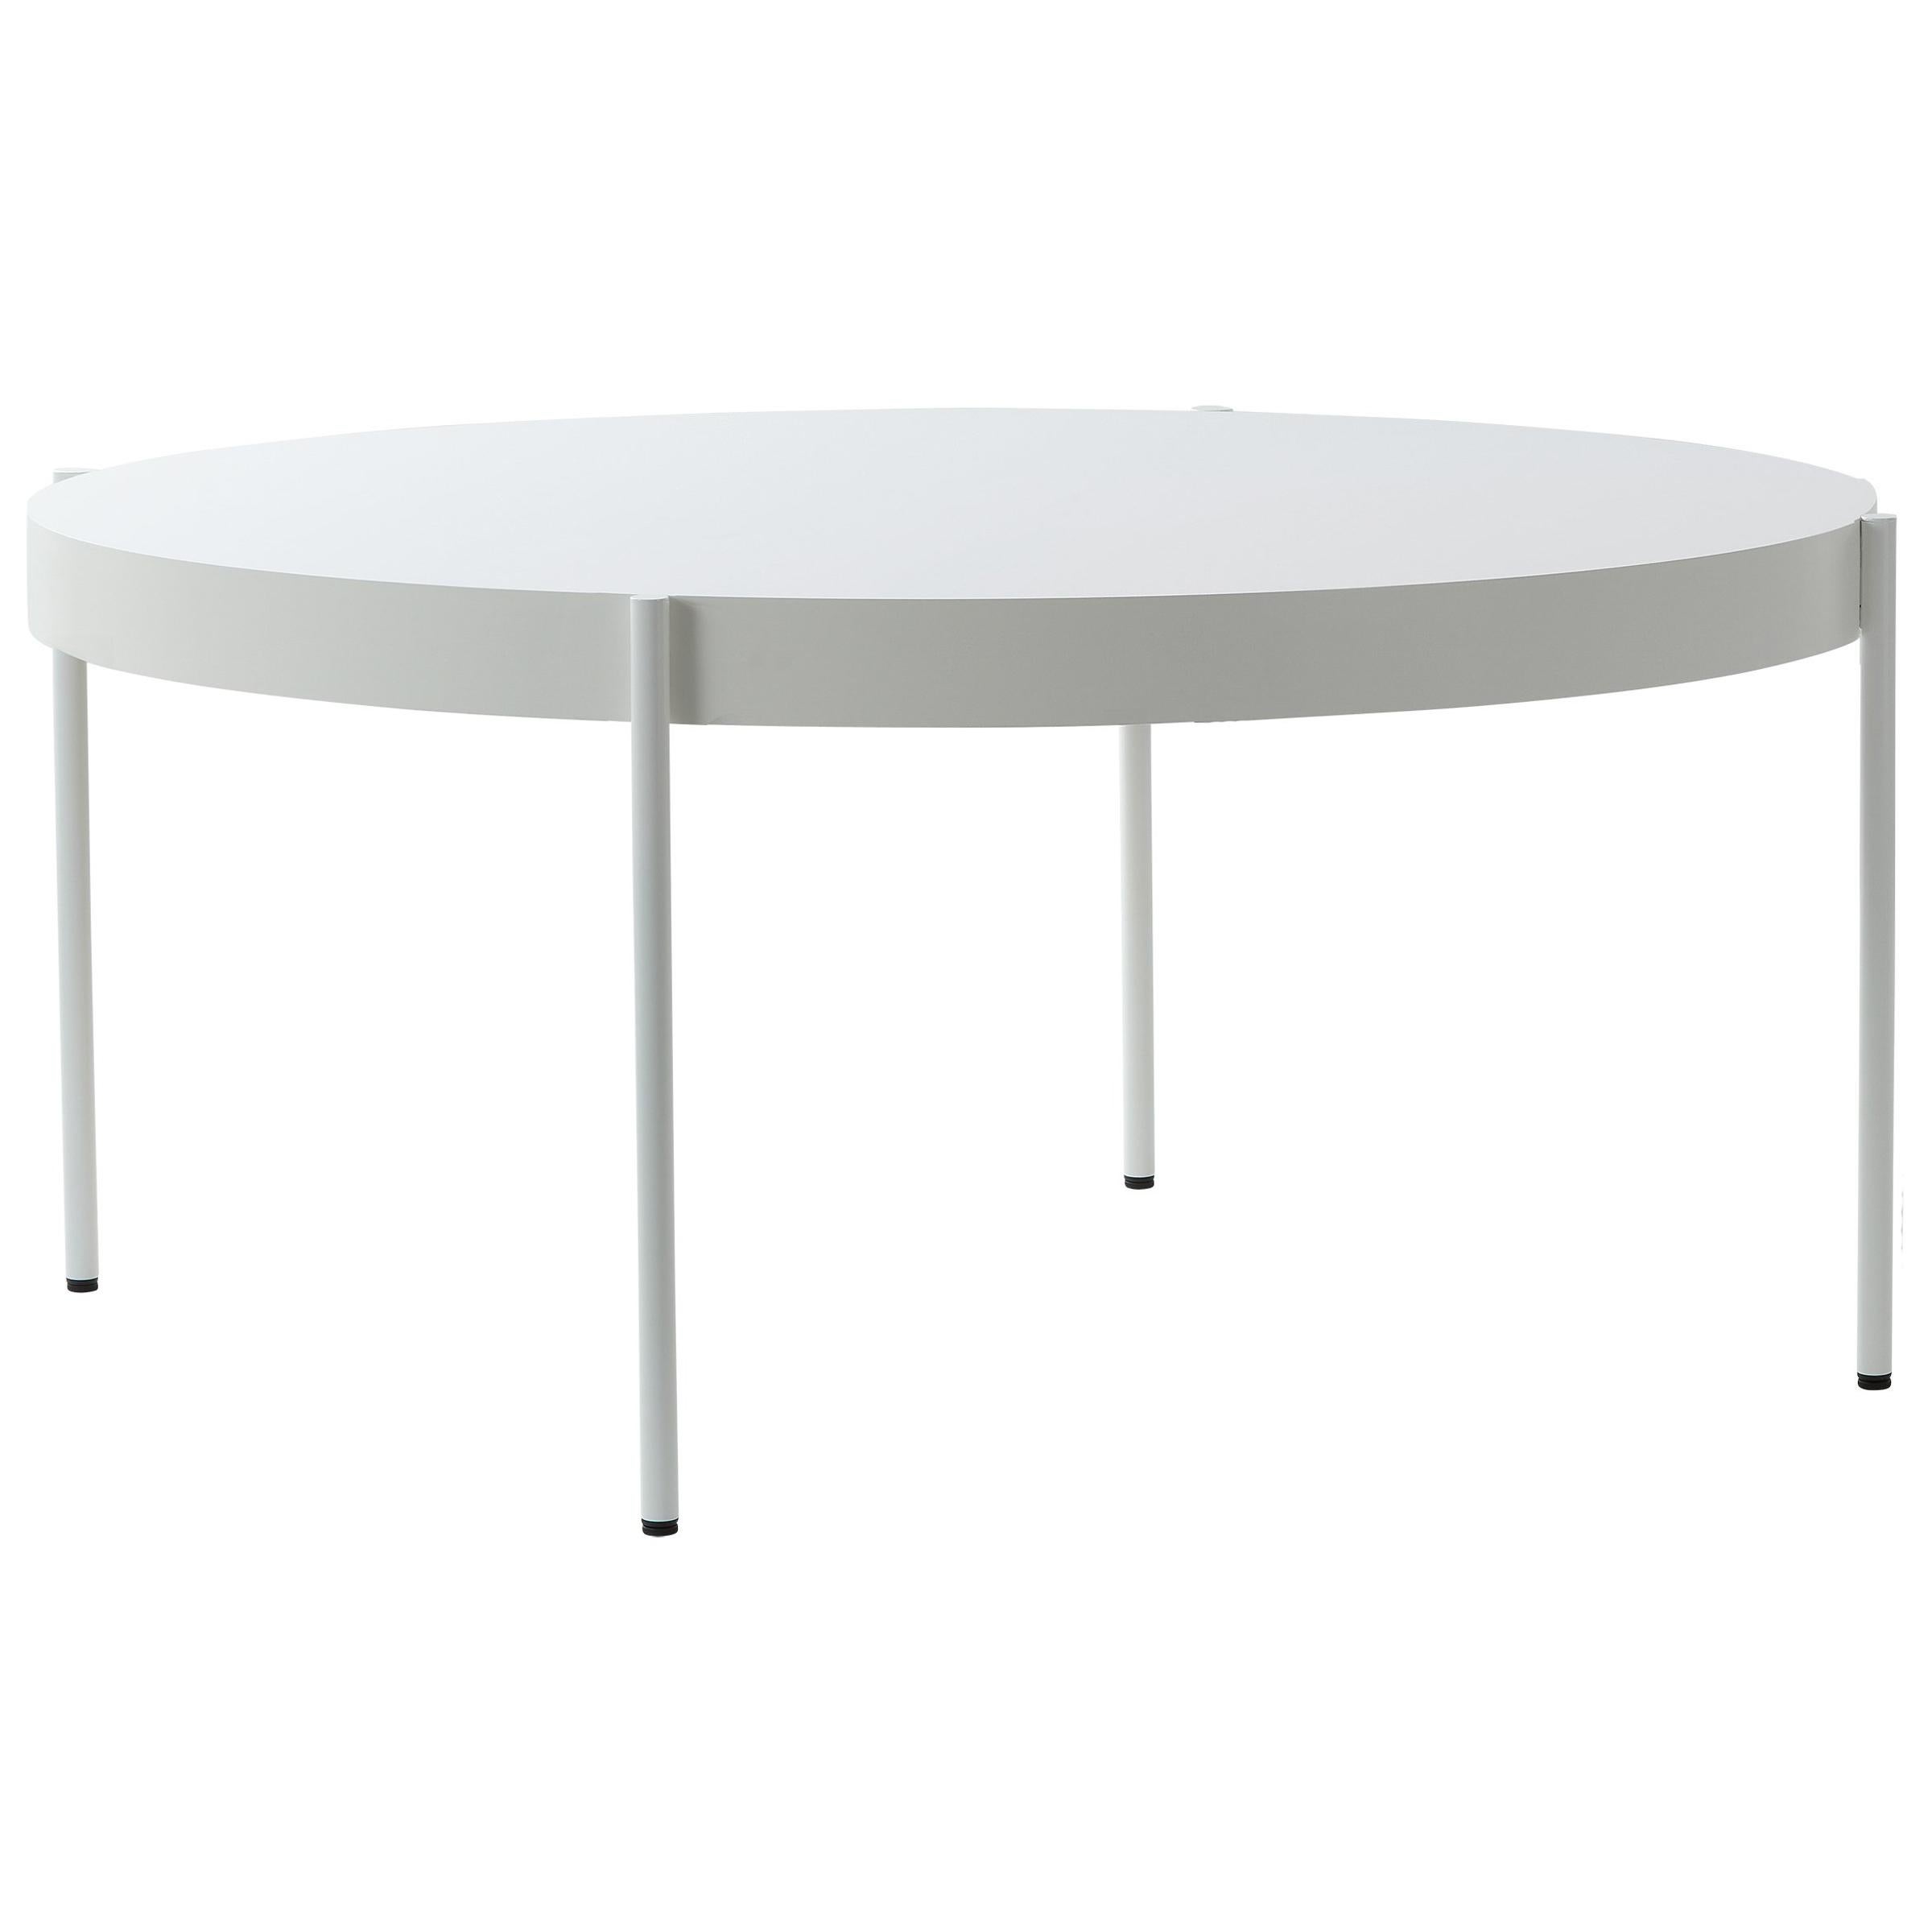 Series 430 Large Round Dining Table in White by Verner Panton